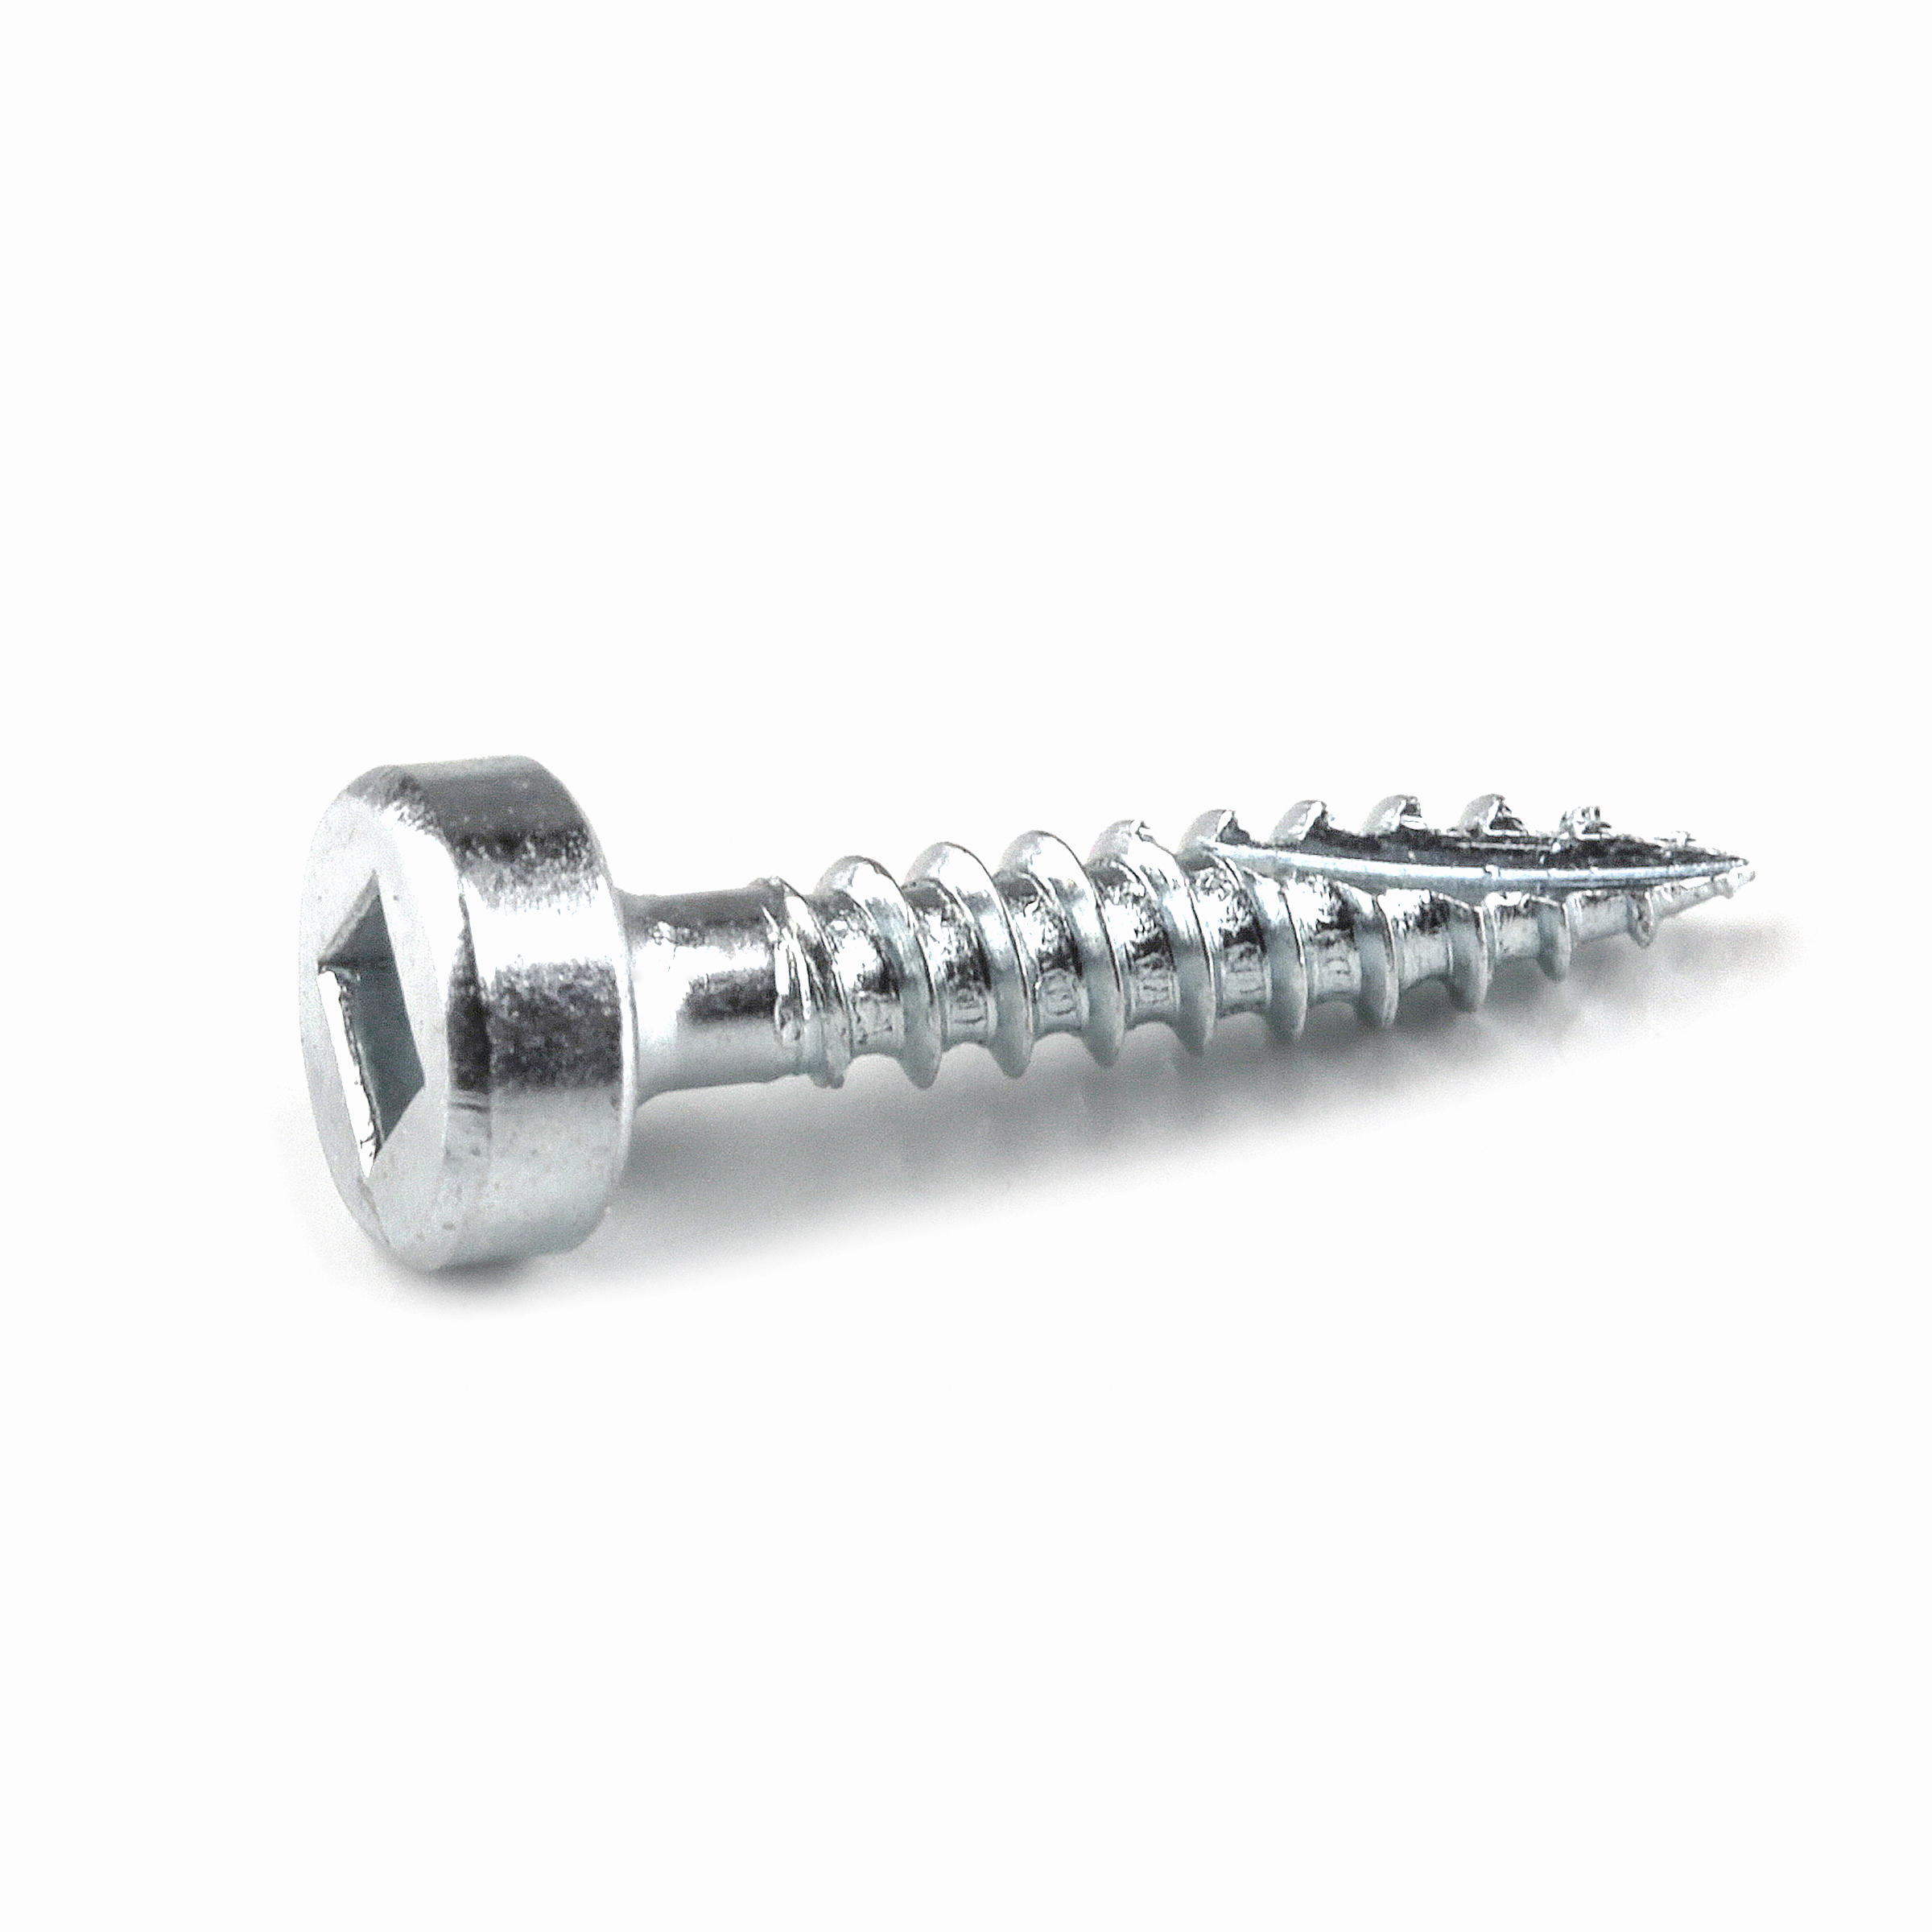 1 Piece S2 Steel 1/4 Shank 150 Pack 150 Count 6 Length Square Recess Head Screwdriver/Power Bit 1-1/4 Coarse Thread Number 8 Zinc Coated Pocket Hole Screws 